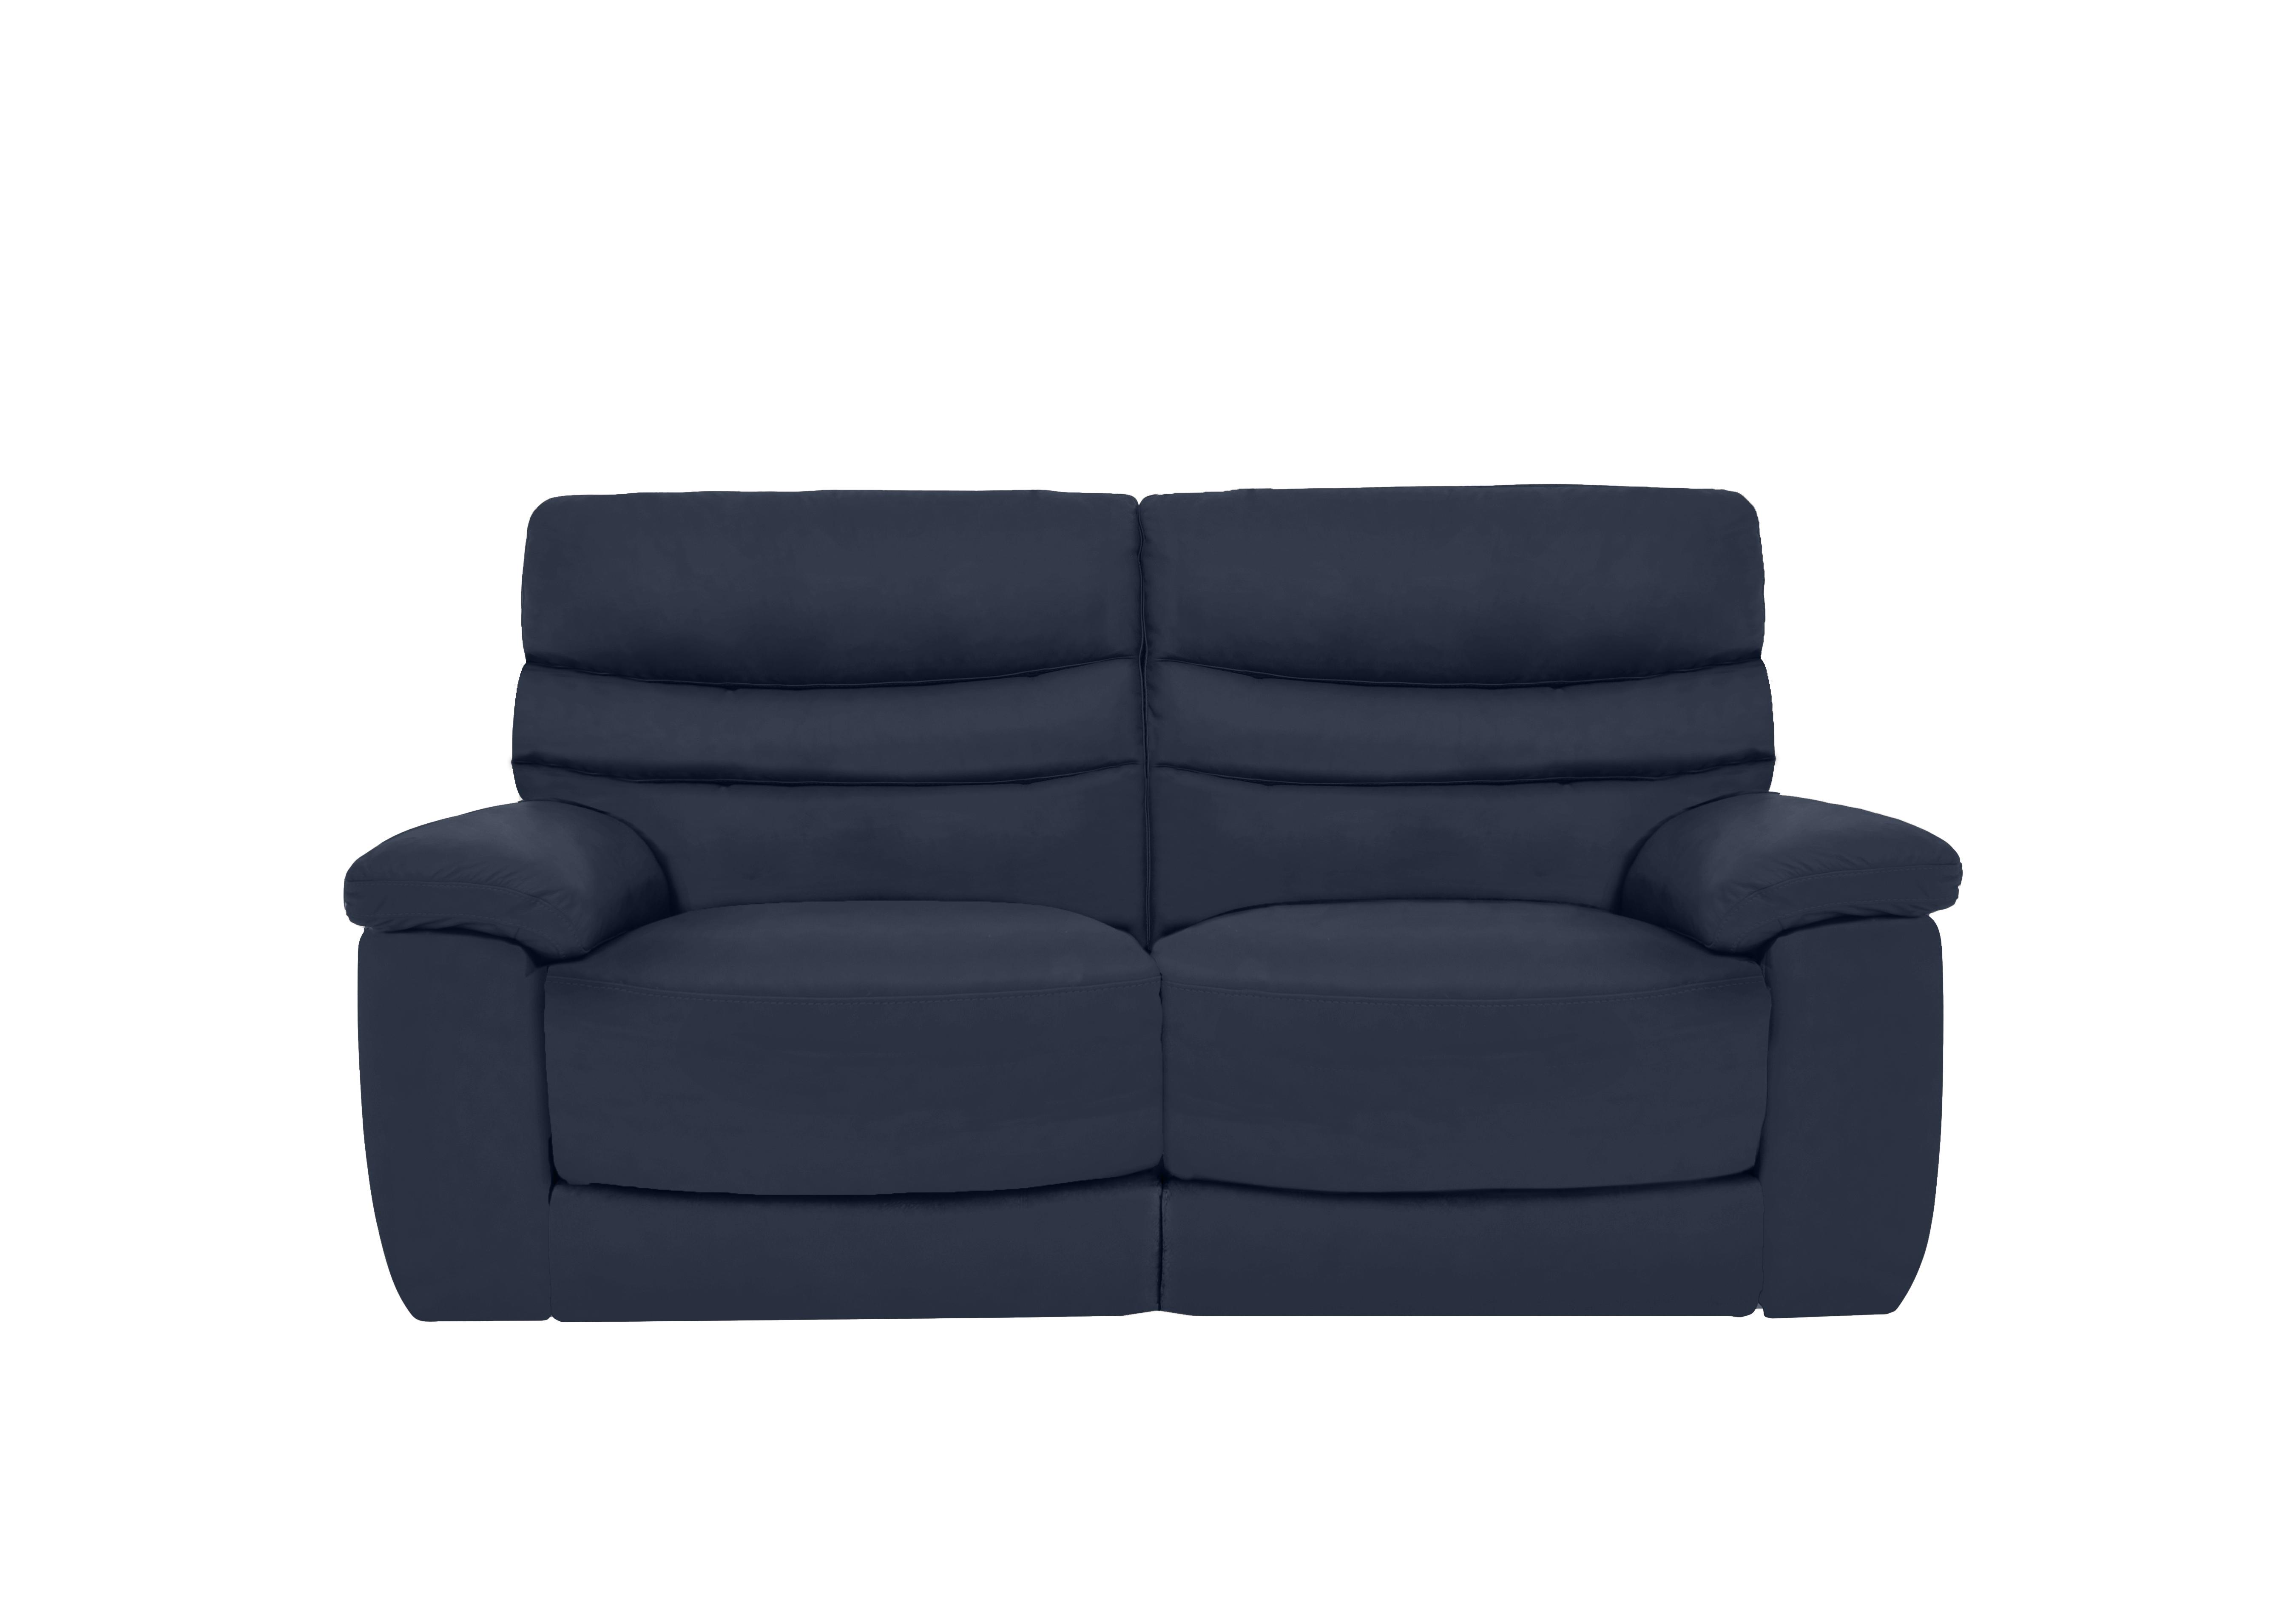 Nimbus 2 Seater Leather Power Recliner Sofa with Power Headrests and Power Lumbar in Bx-036c Navy on Furniture Village